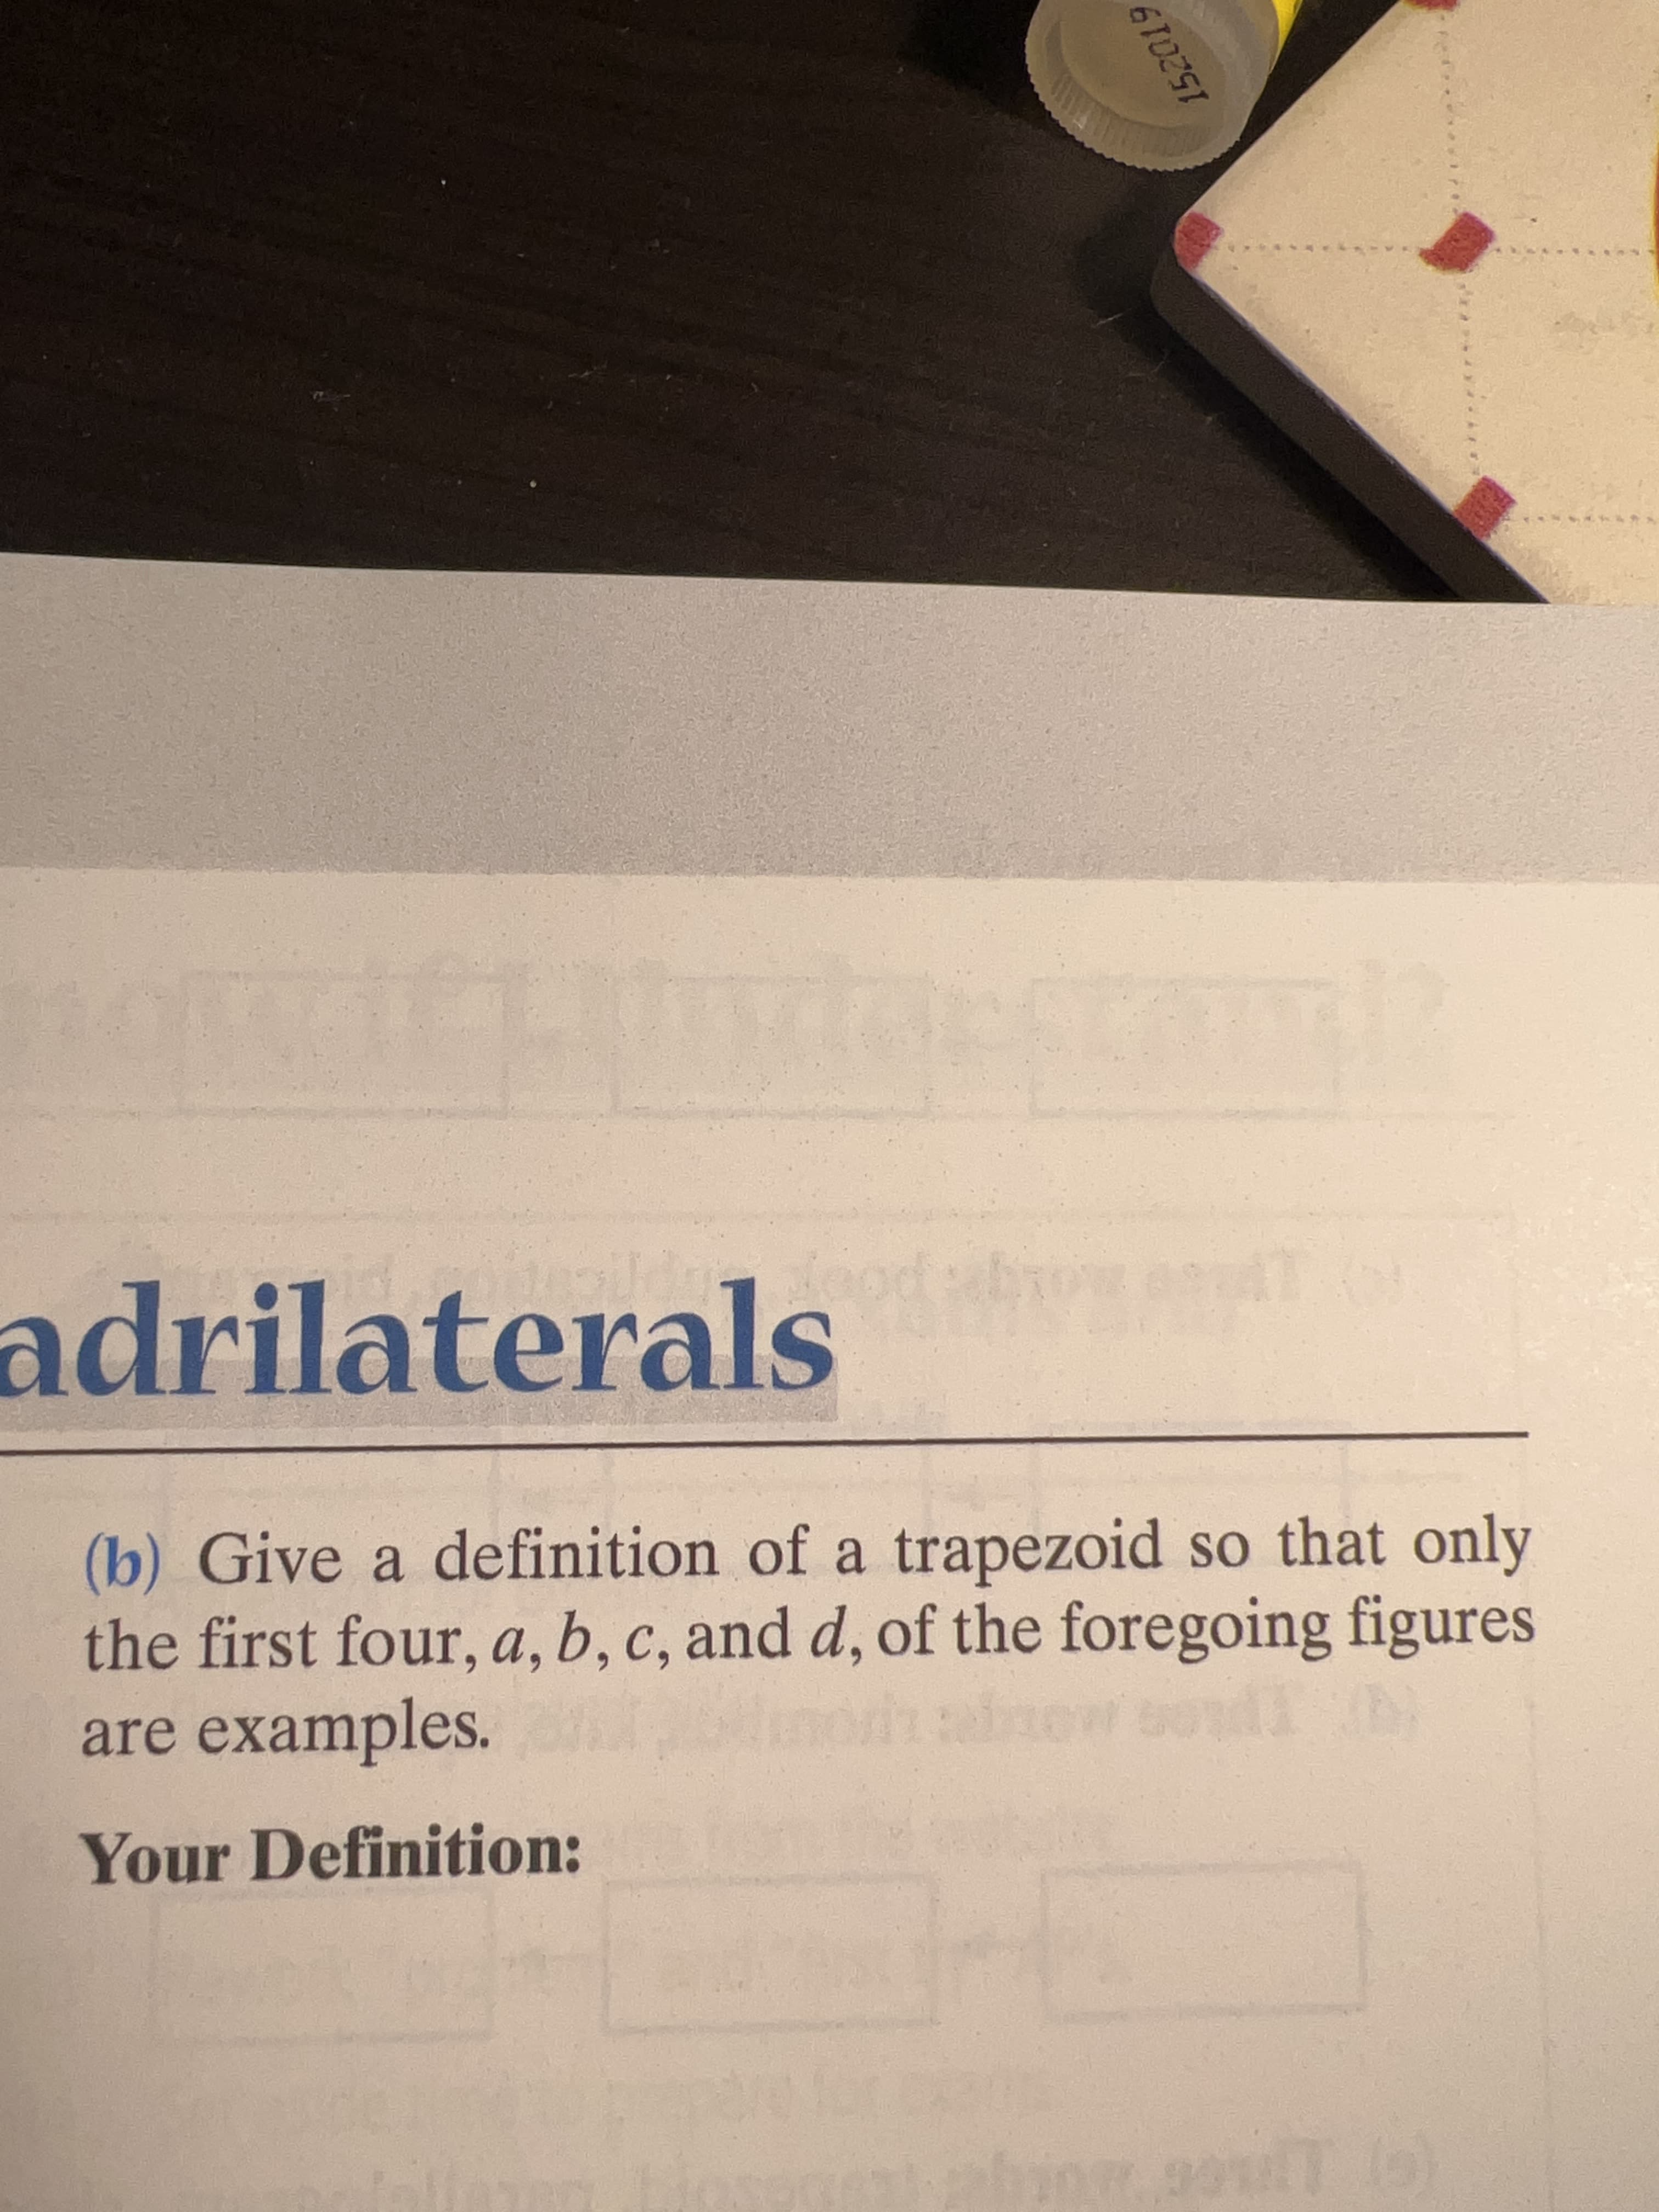 adrilaterals
(b) Give a definition of a trapezoid so that only
the first four, a, b, c, and d, of the foregoing figures
are examples.
Your Definition:
